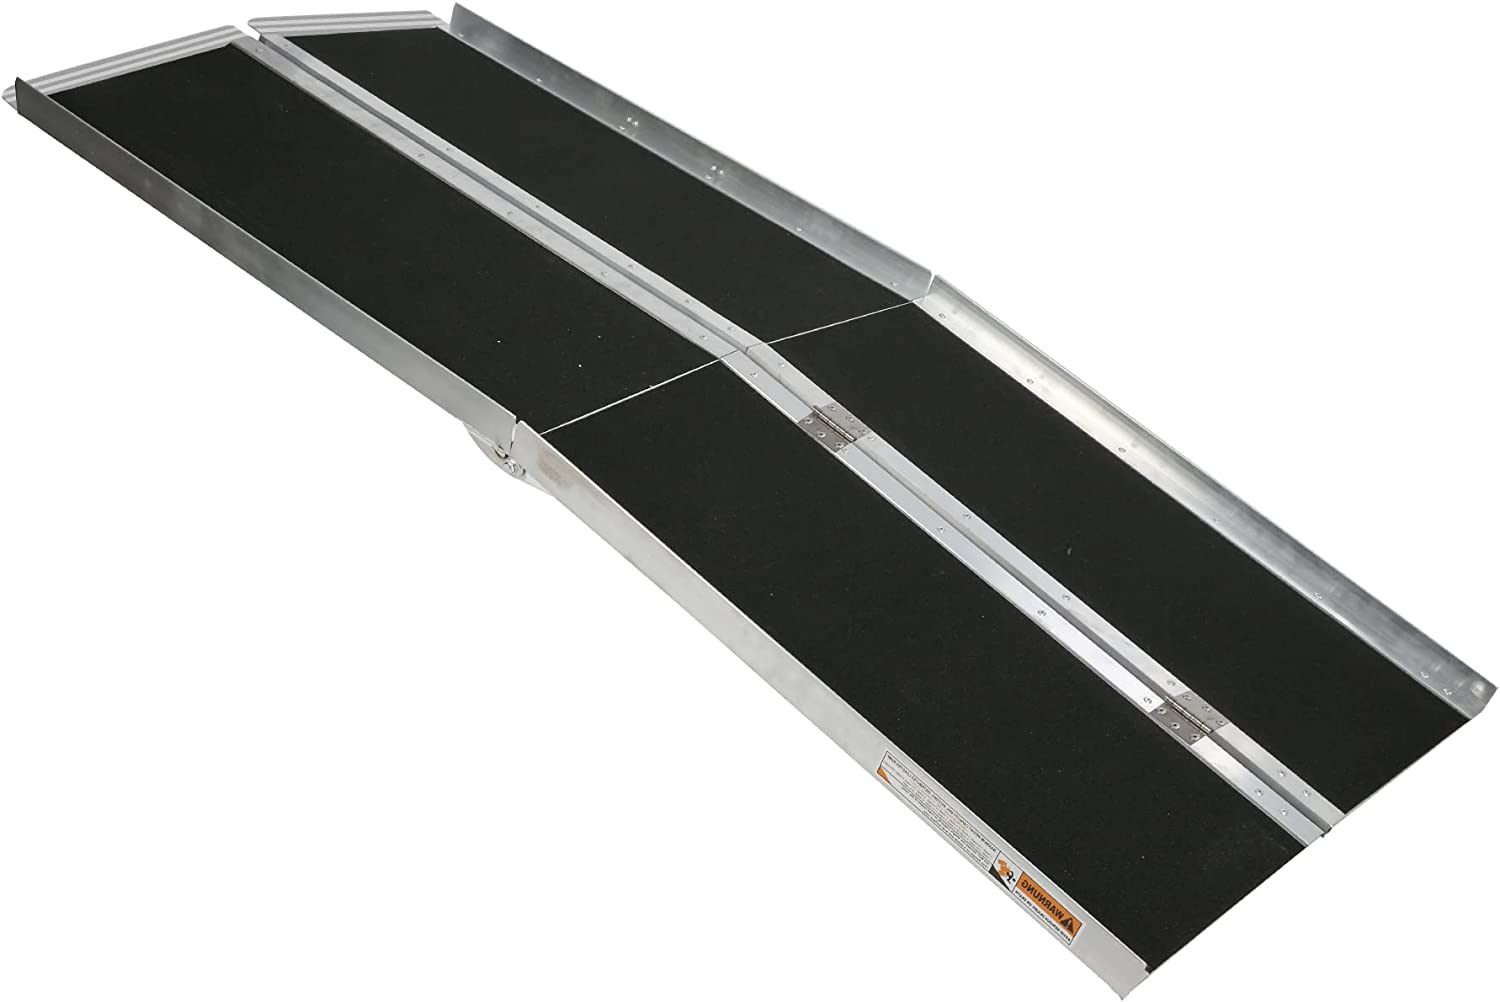 (Out of Stock) 6 ft. Multifold Aluminum Portable Wheelchair Ramp w/ Slip-Resistant Surface